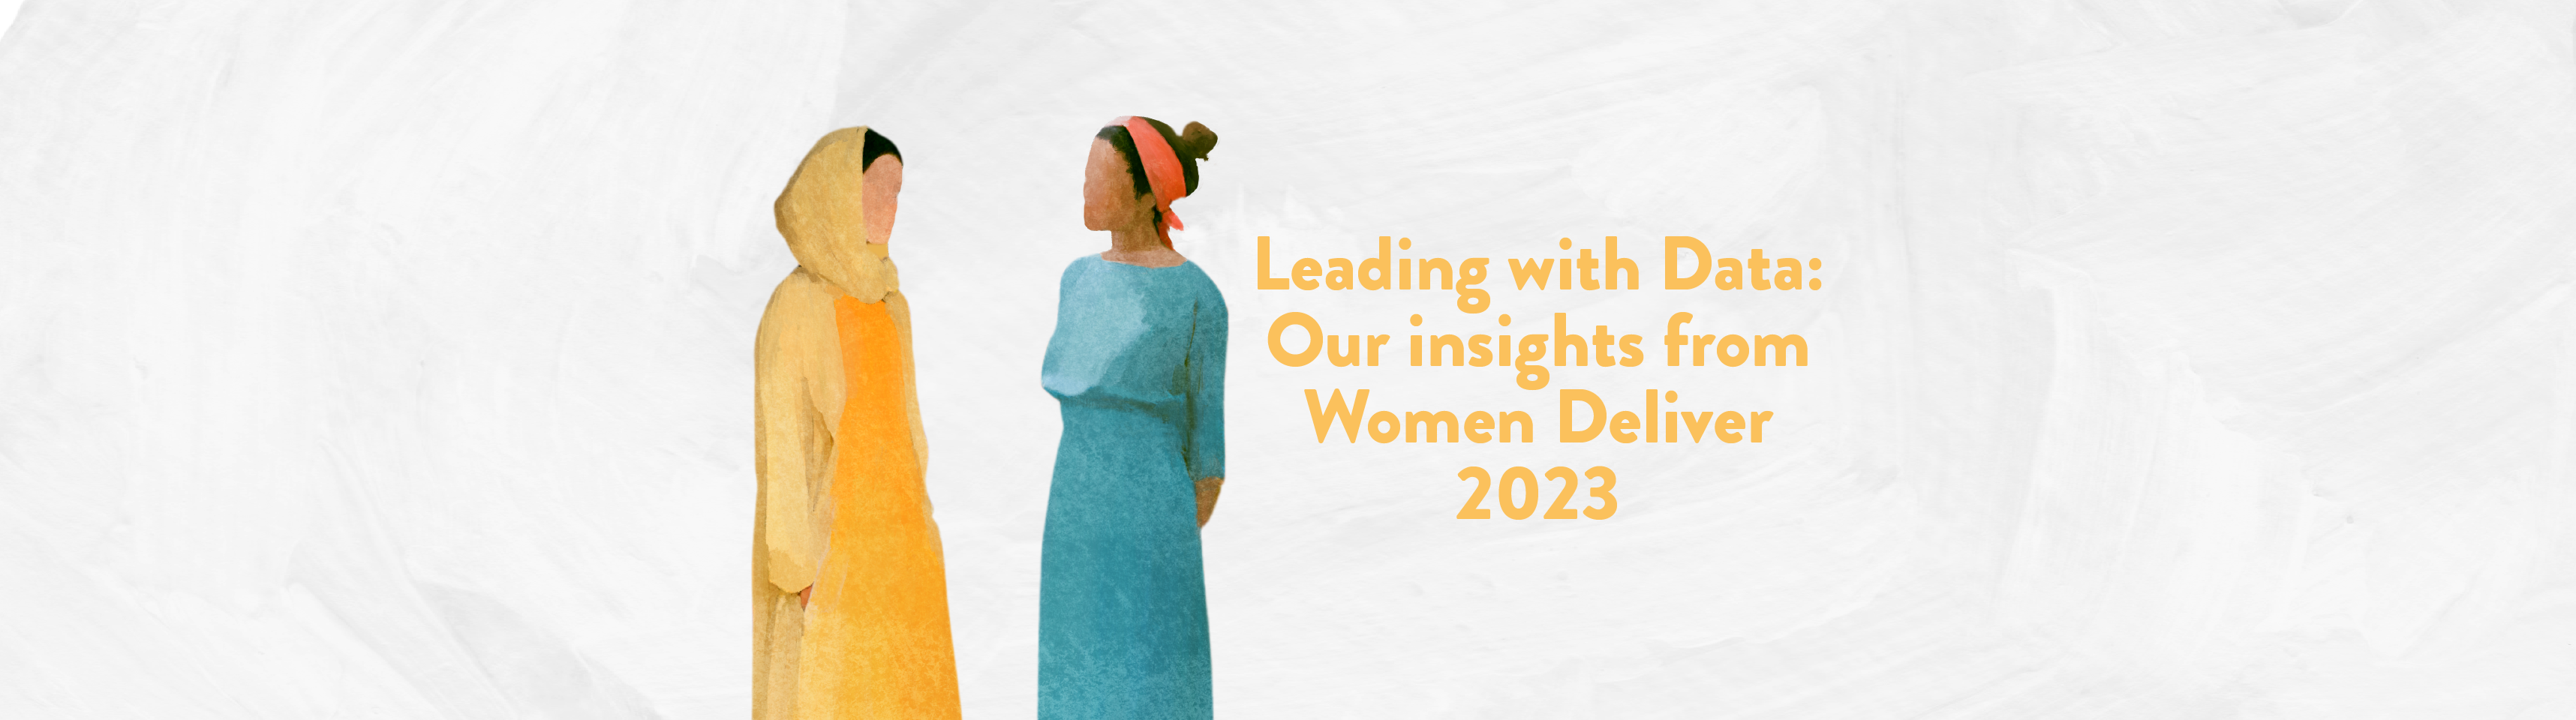 Leading with Data: Our insights from Women Deliver 2023